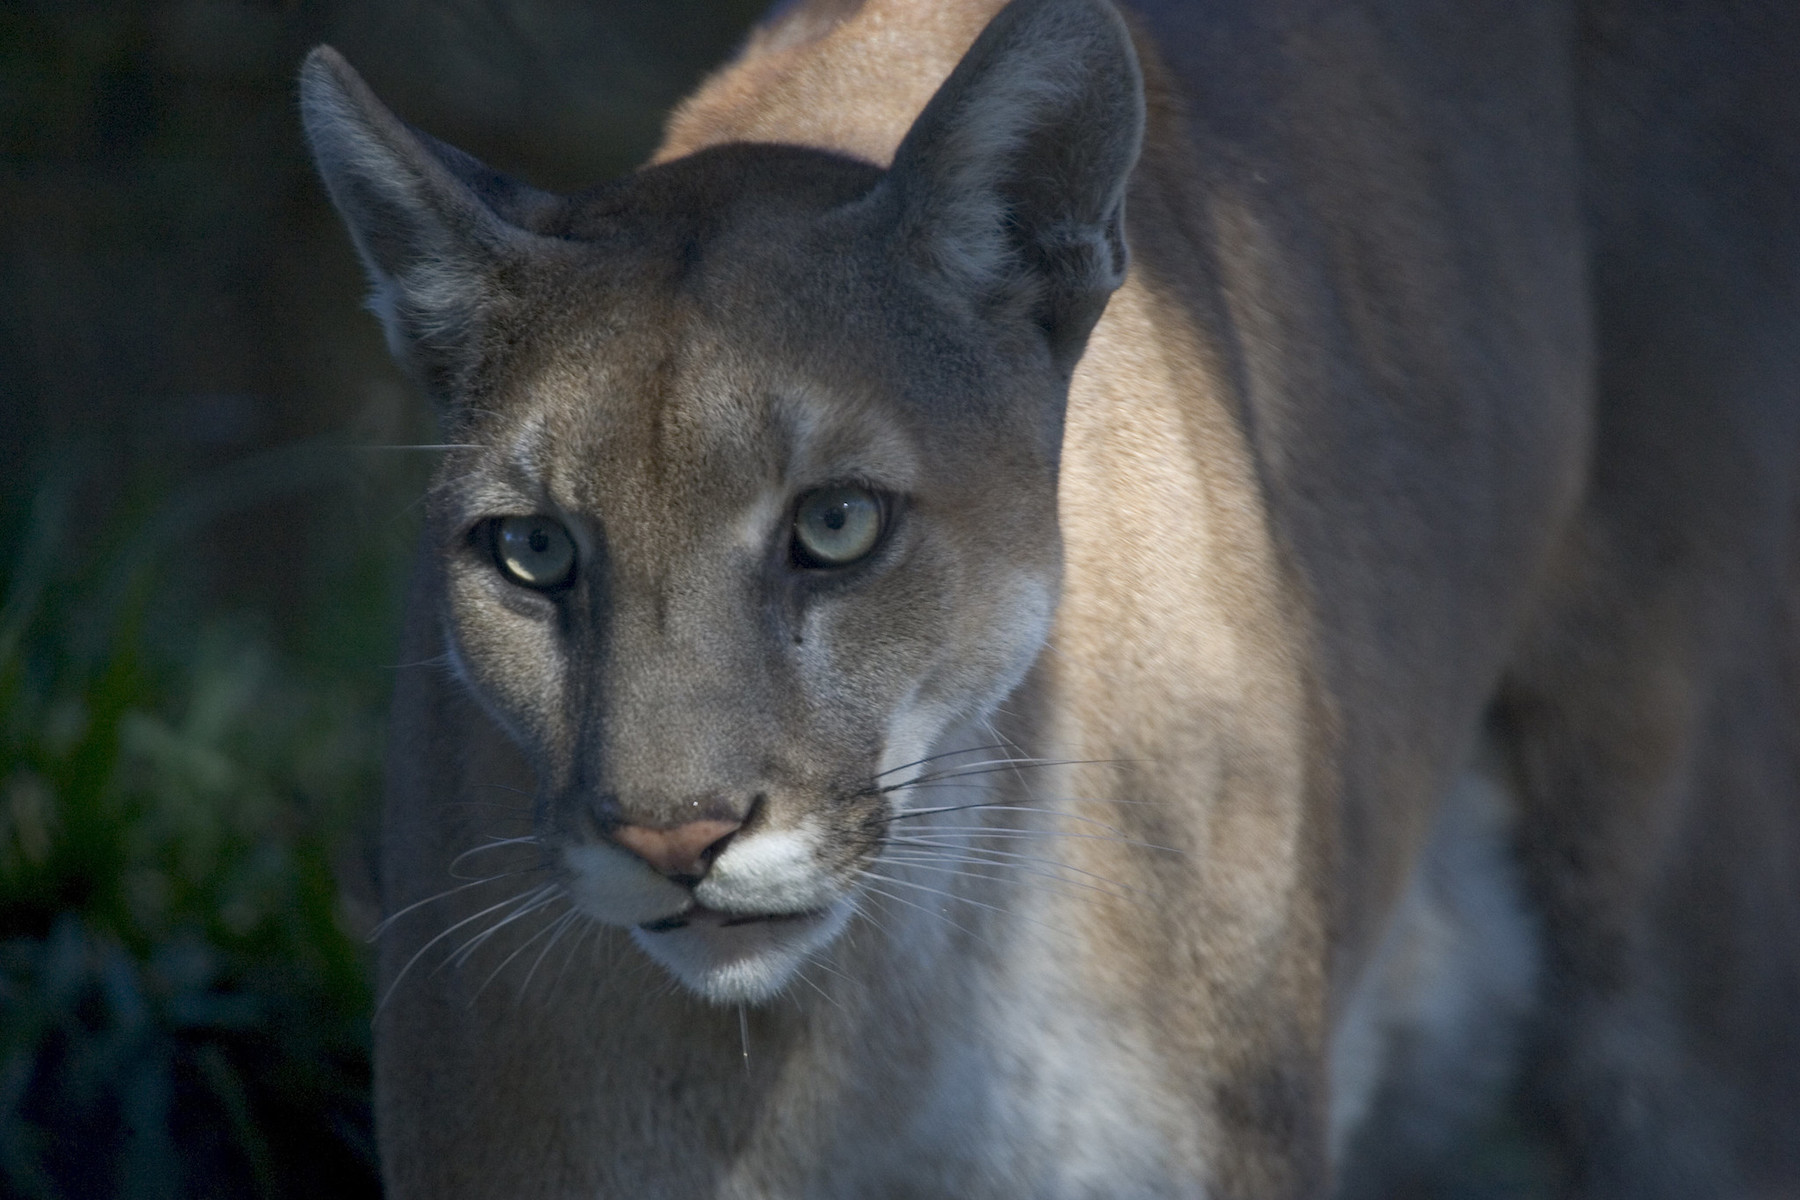 Florida Democrats Picked Endangered Panther as New Mascot [Video]